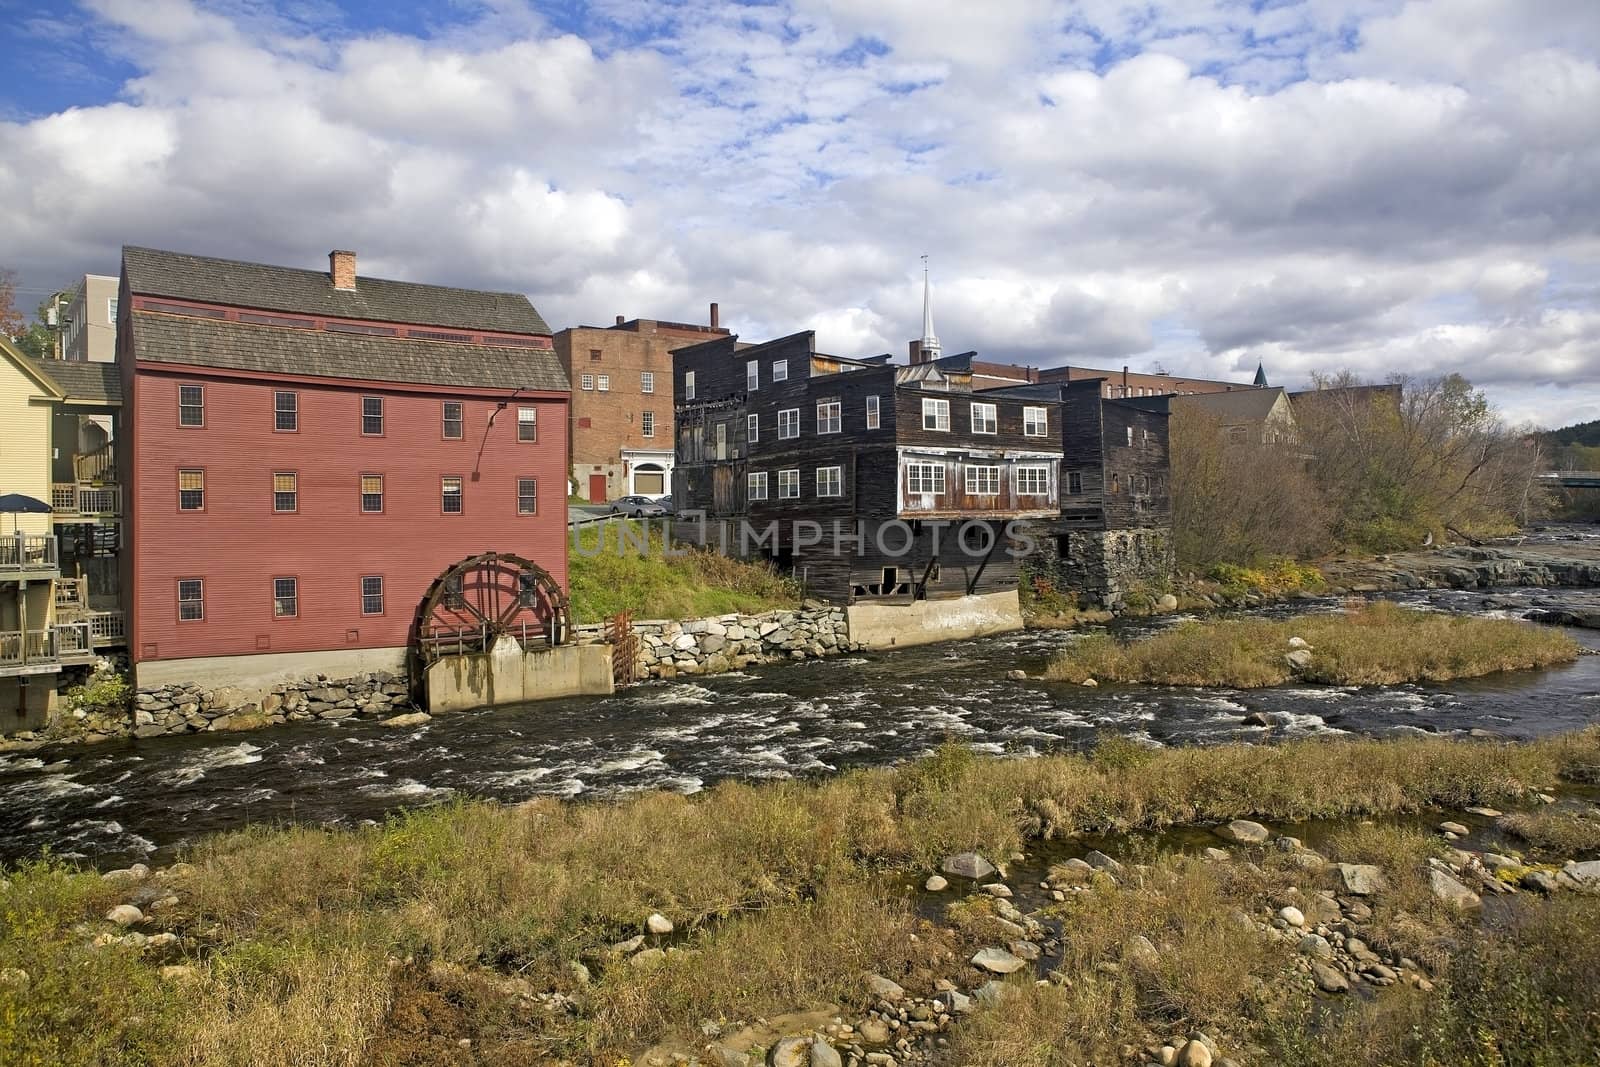 A restored vintage grain mill with water wheel on the Ammonoosuc River is still operating in Littleton, New Hampshire, USA. The mill is a popular tourist stop.